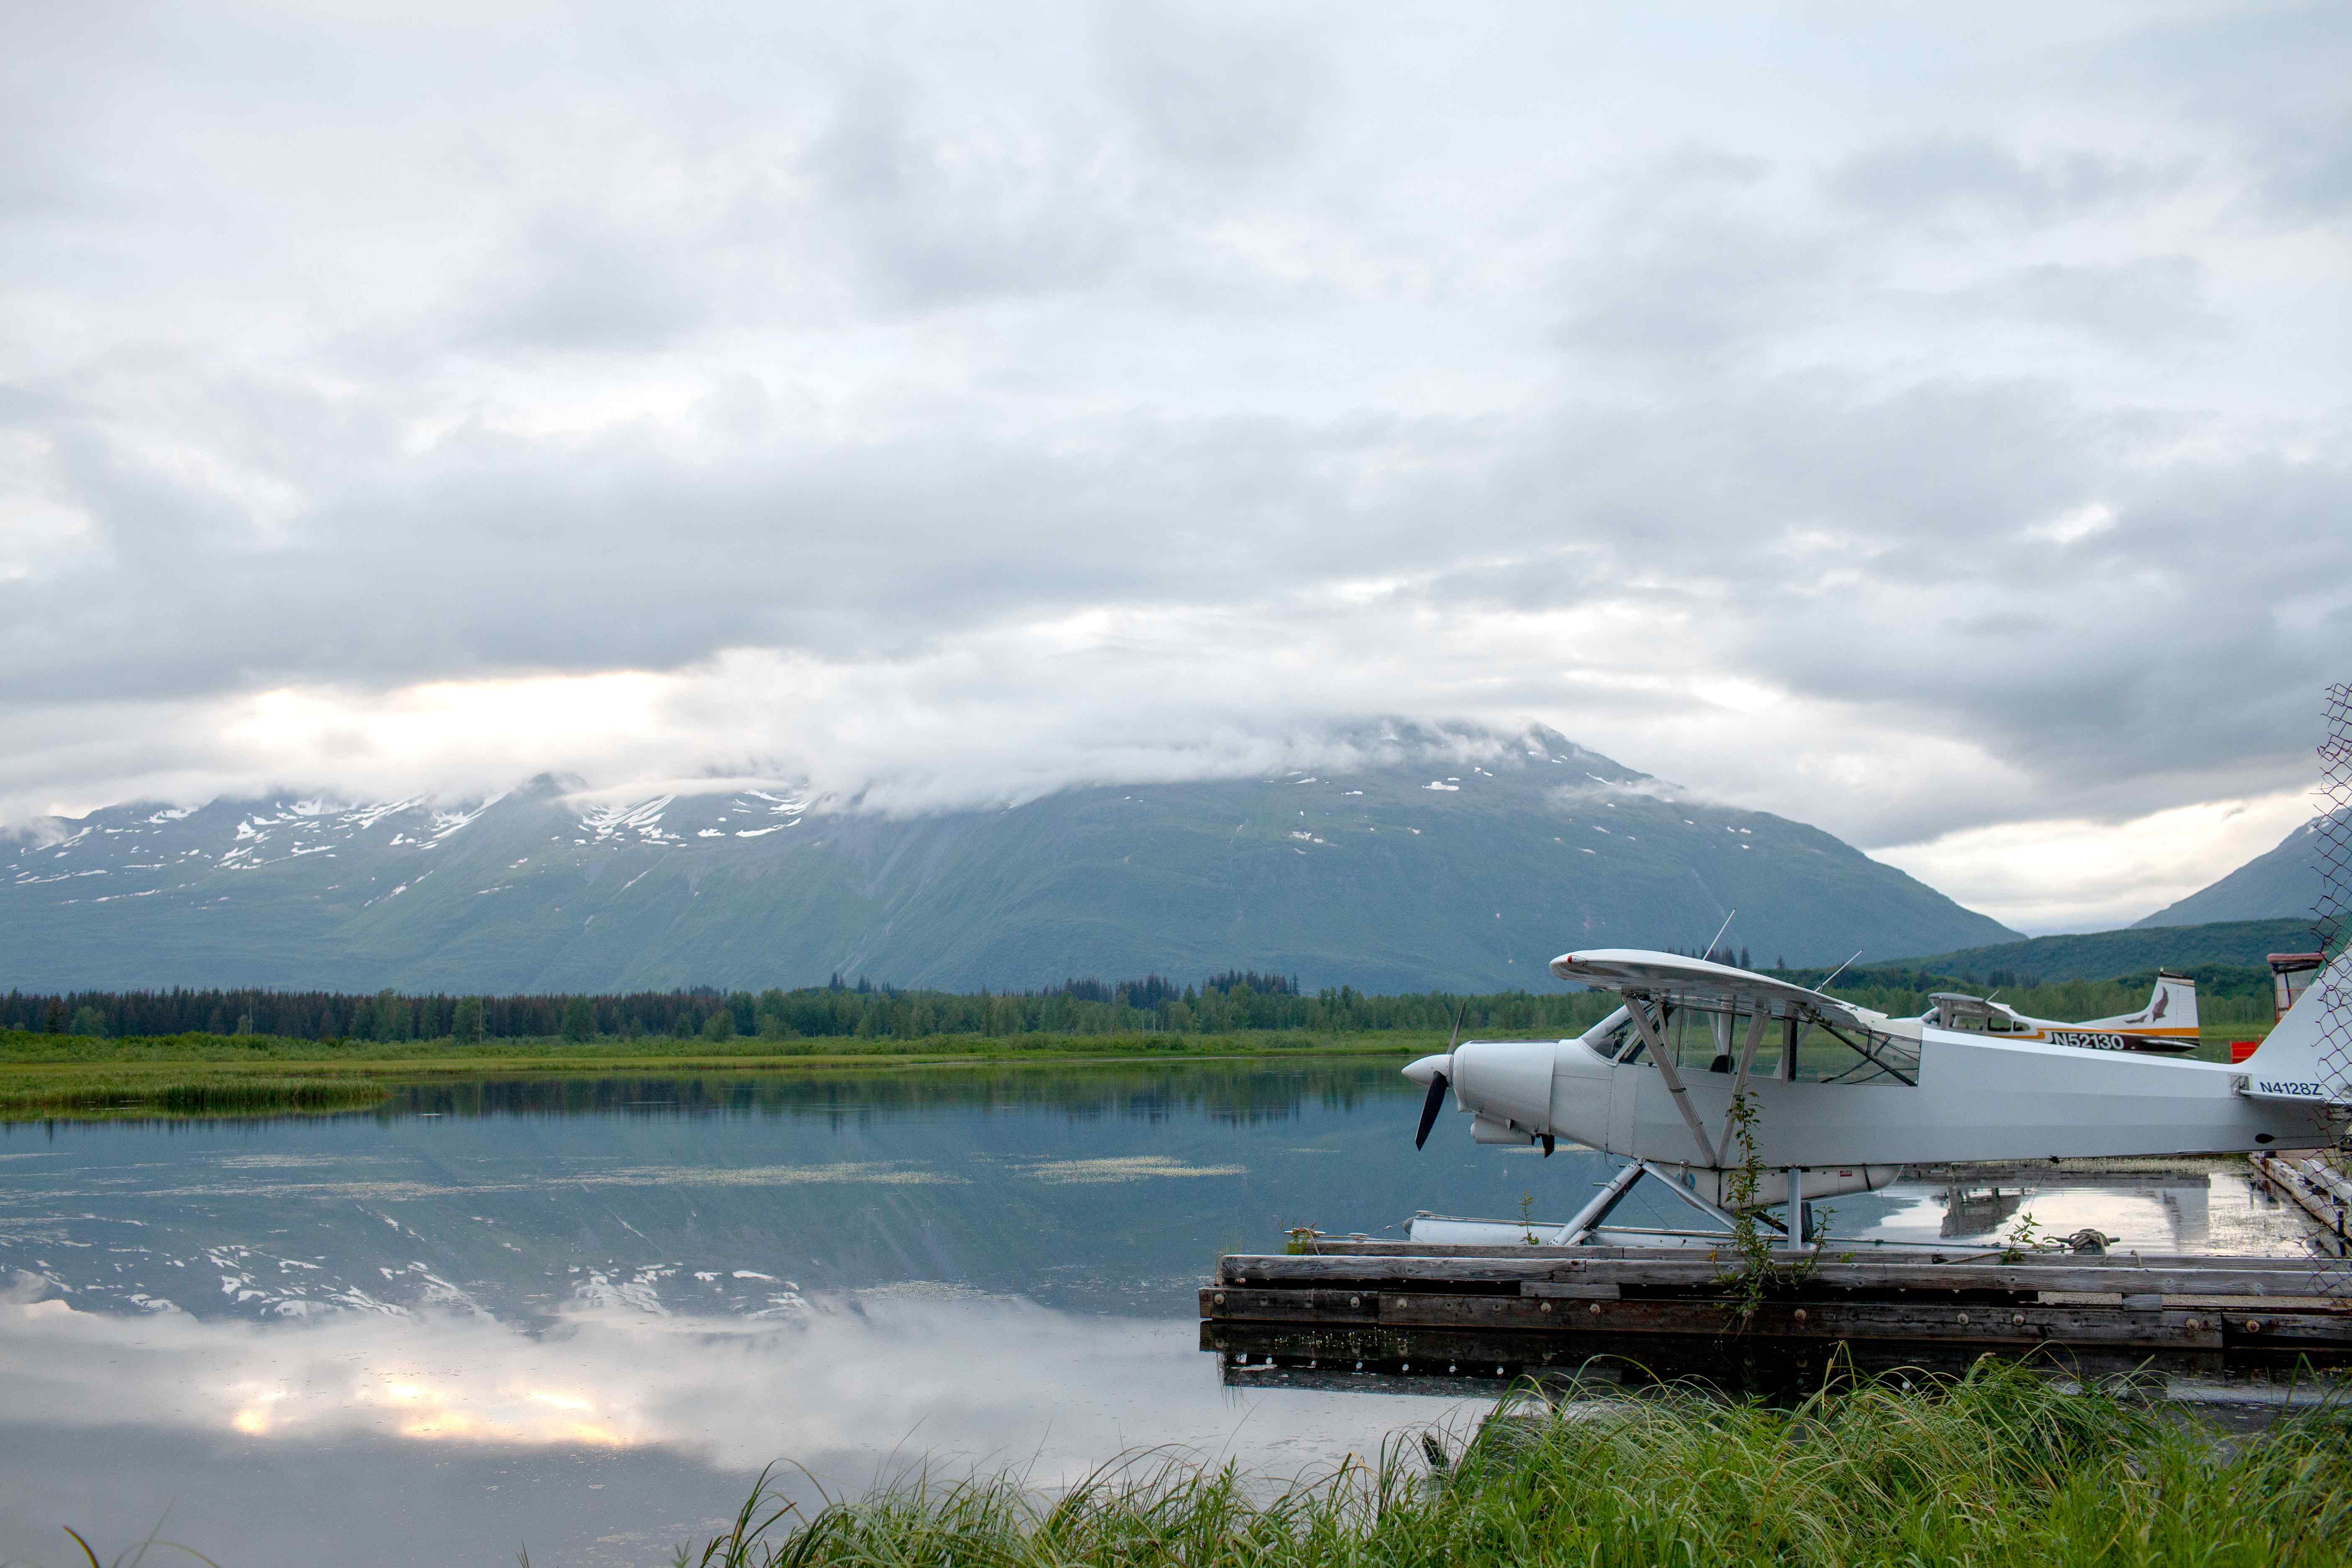 Wish 01: $75 Offsets Travel Costs For One Priest To Visit A Remote Alaskan Village